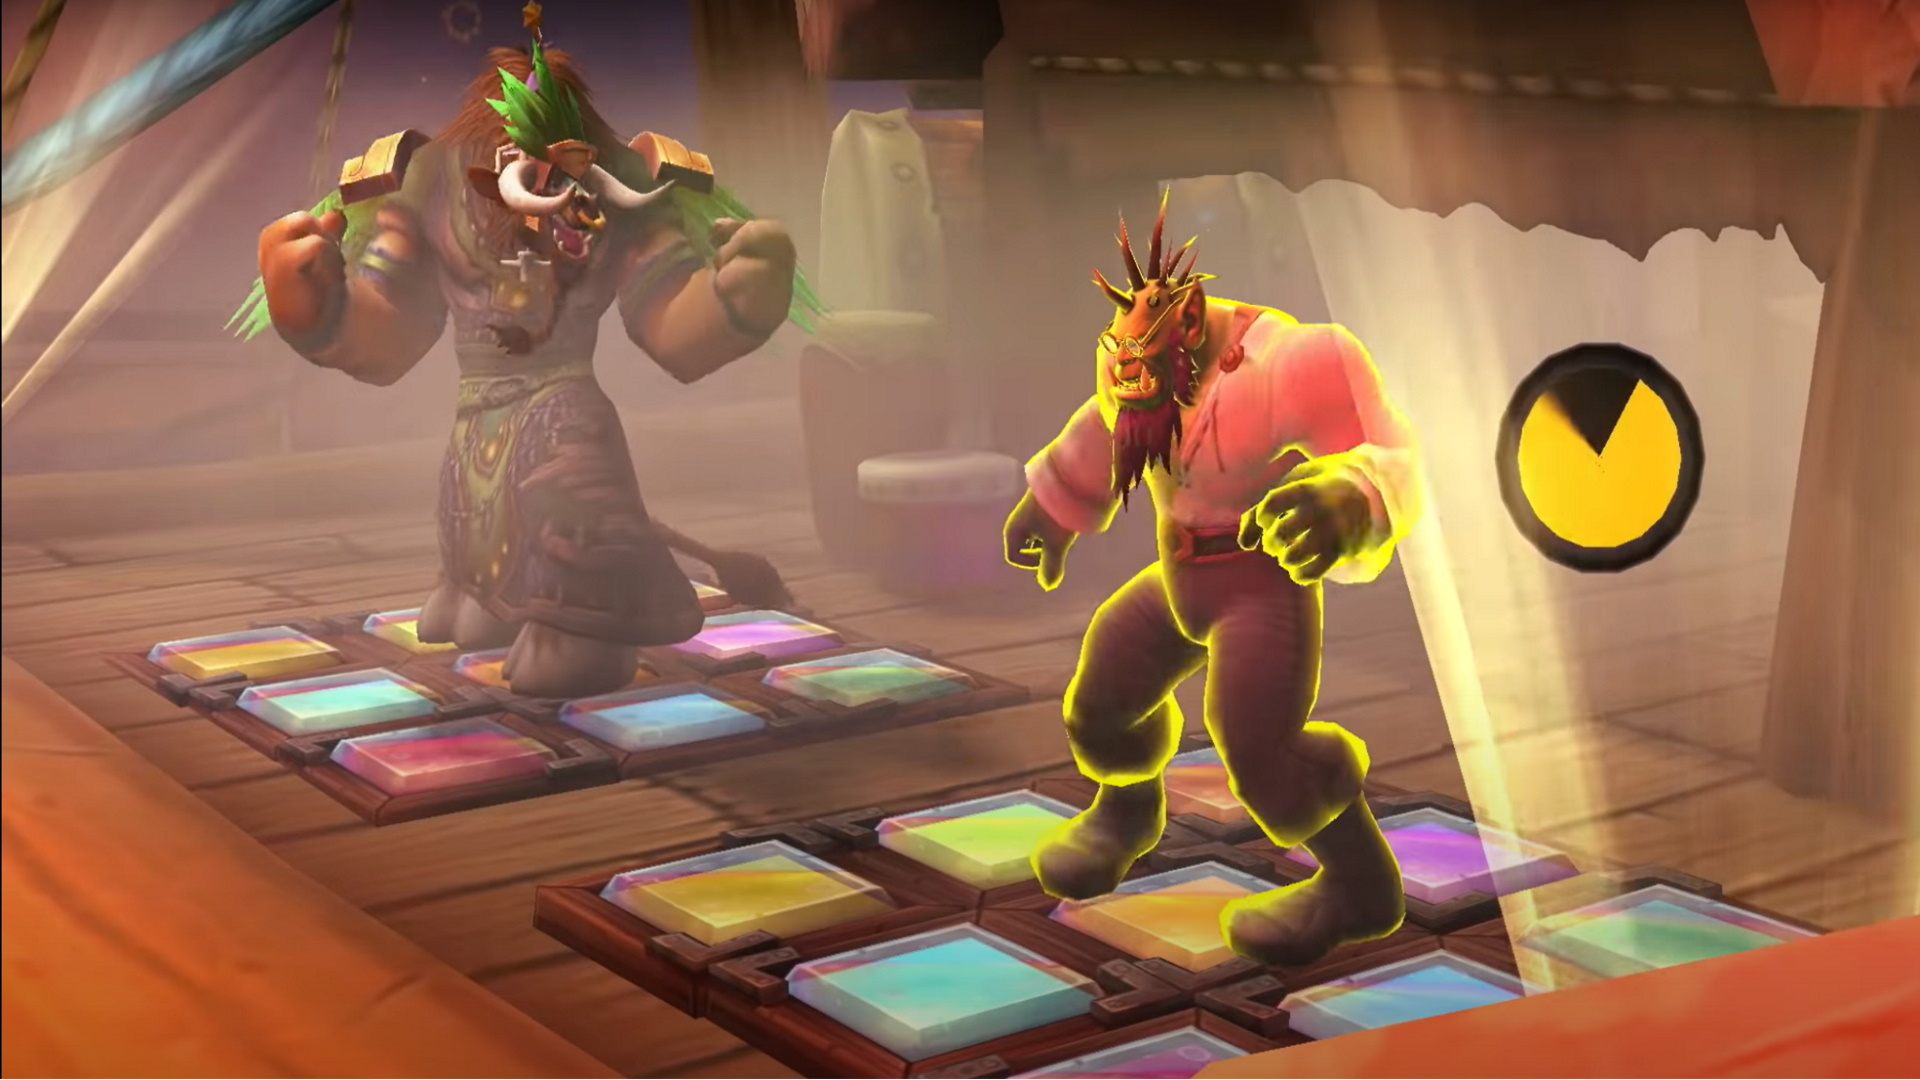 Darkmoon Faire returns to WoW with a DDR-style dancing minigame